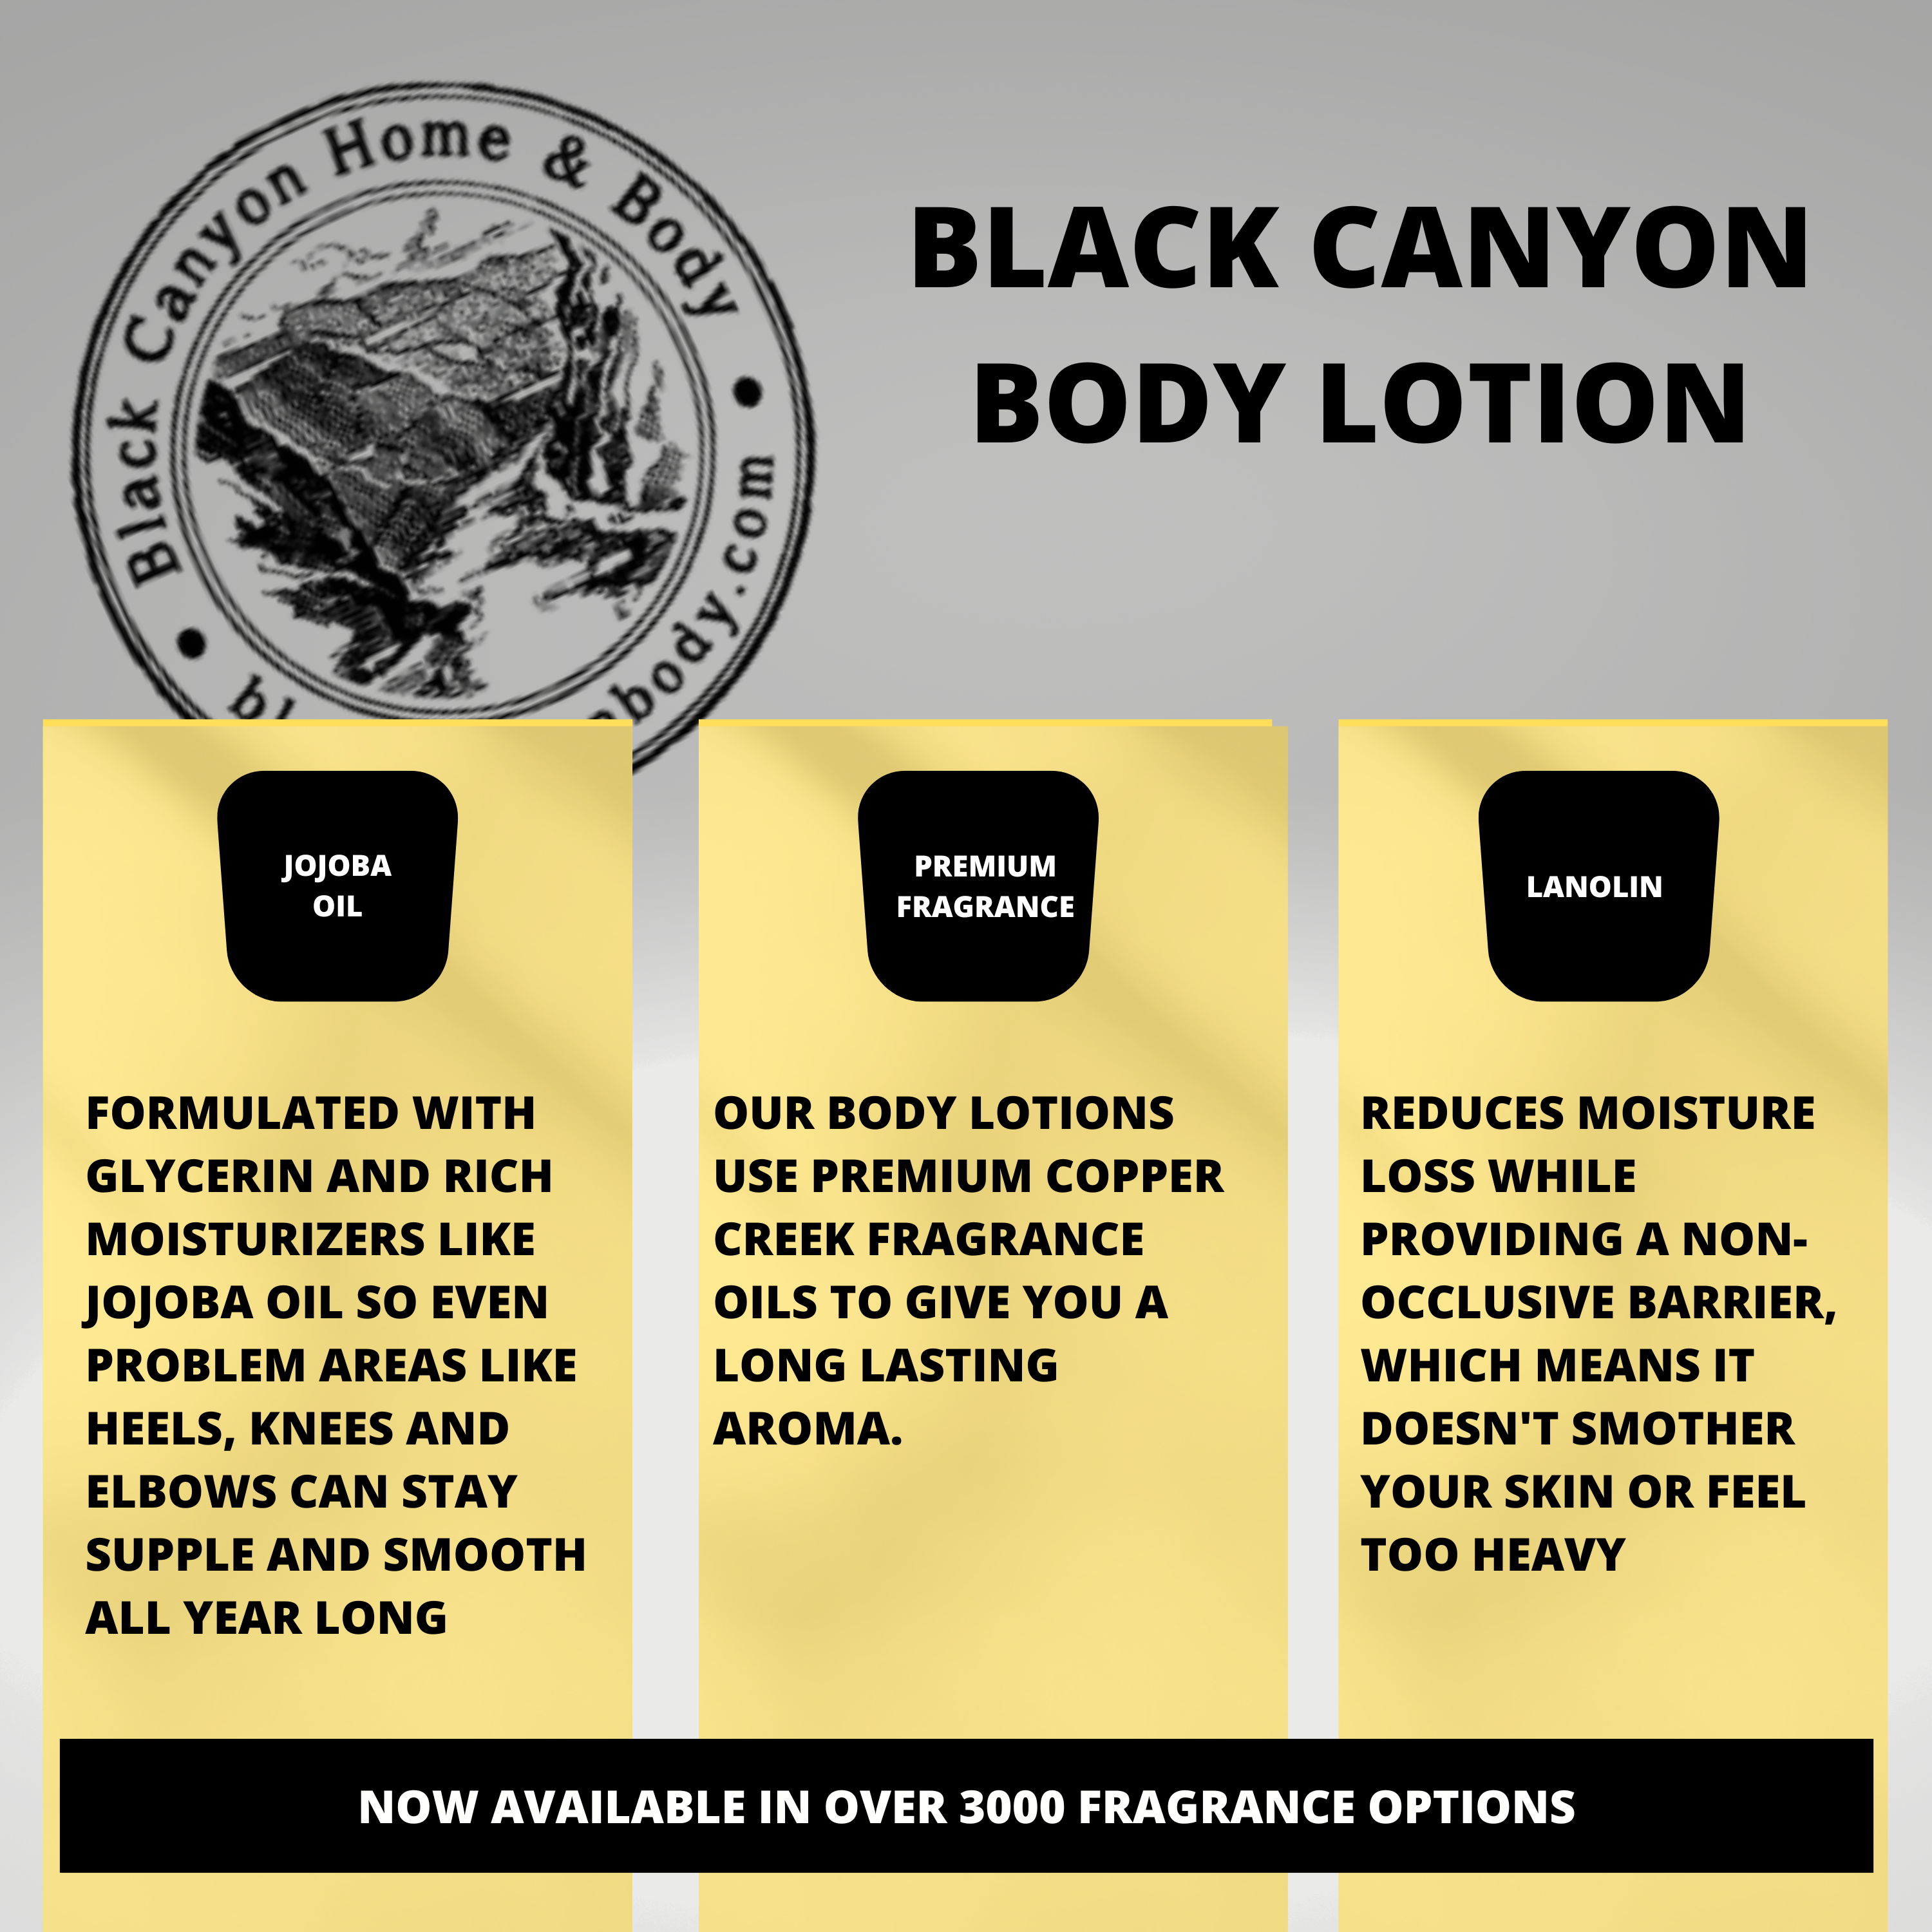 Black Canyon Wintergreen Alps Scented Luxury Body Lotion with Lanolin and Jojoba Oil